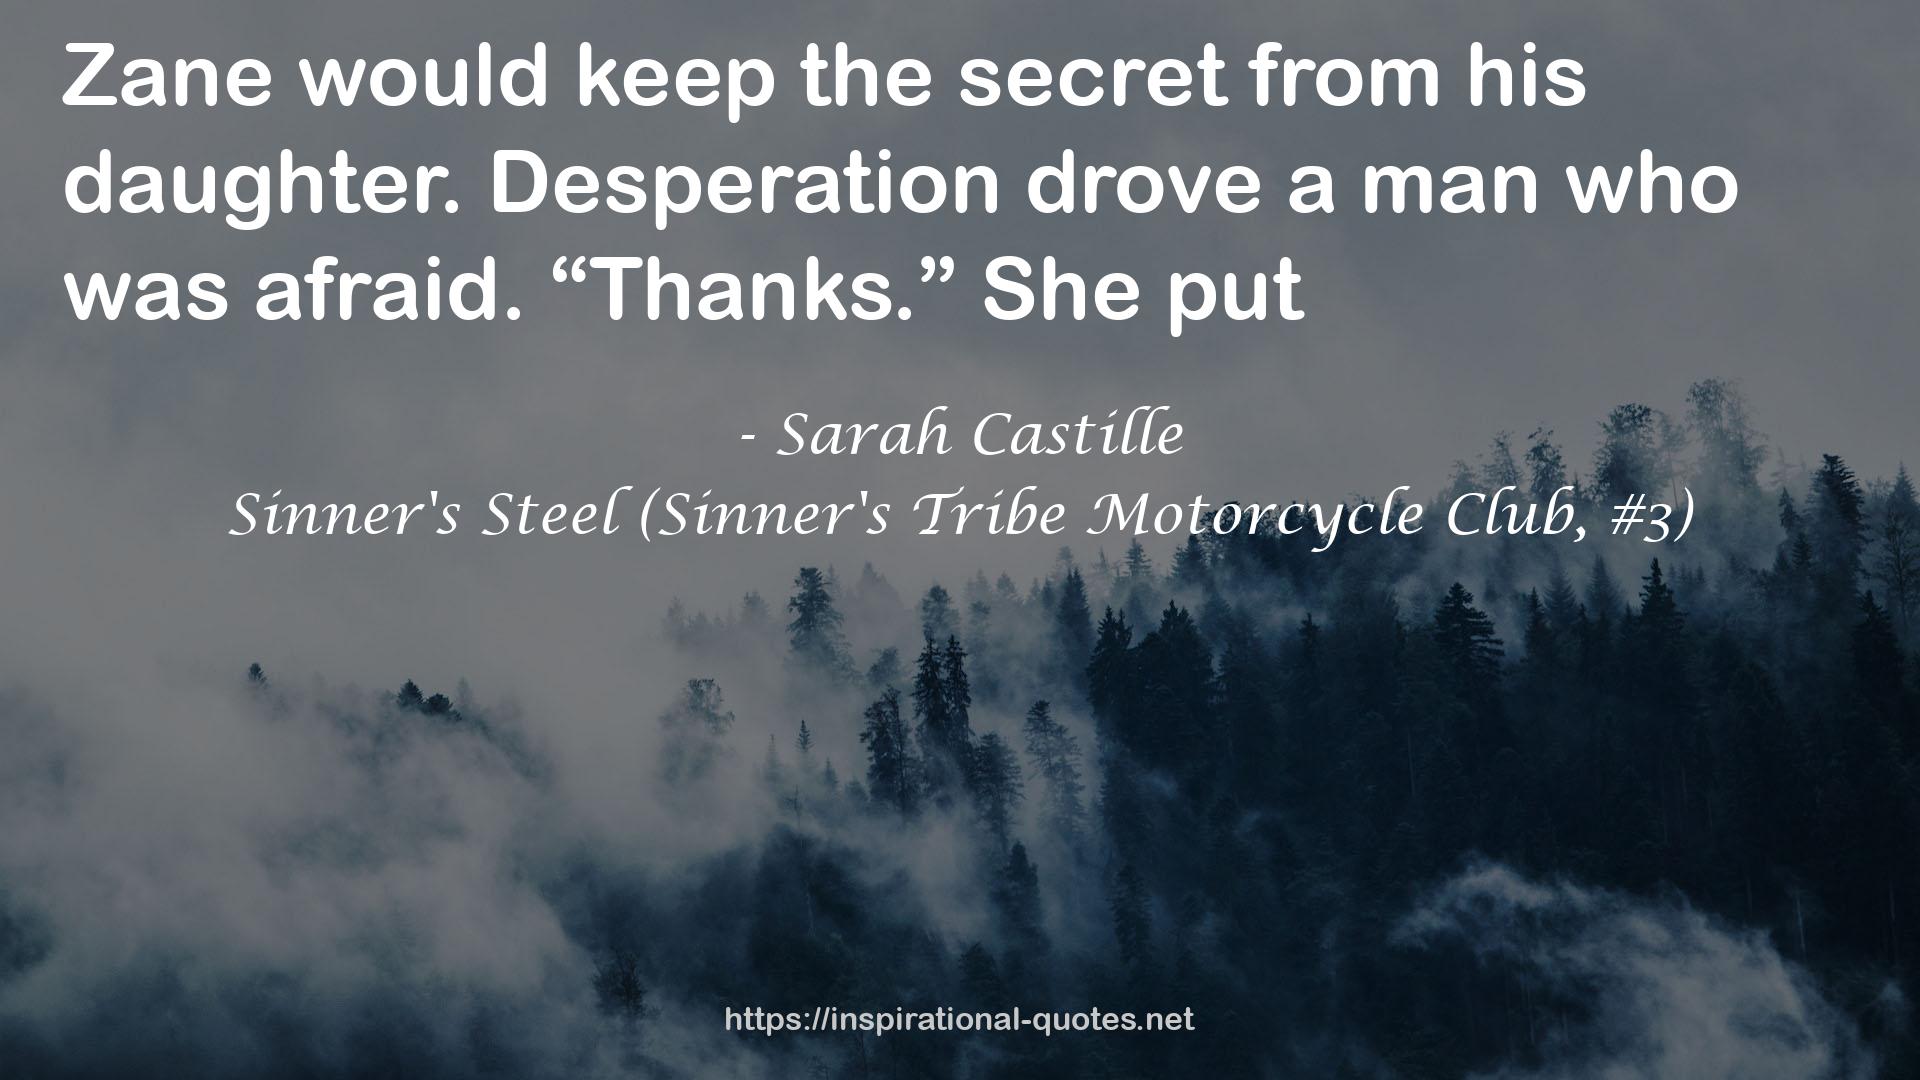 Sinner's Steel (Sinner's Tribe Motorcycle Club, #3) QUOTES